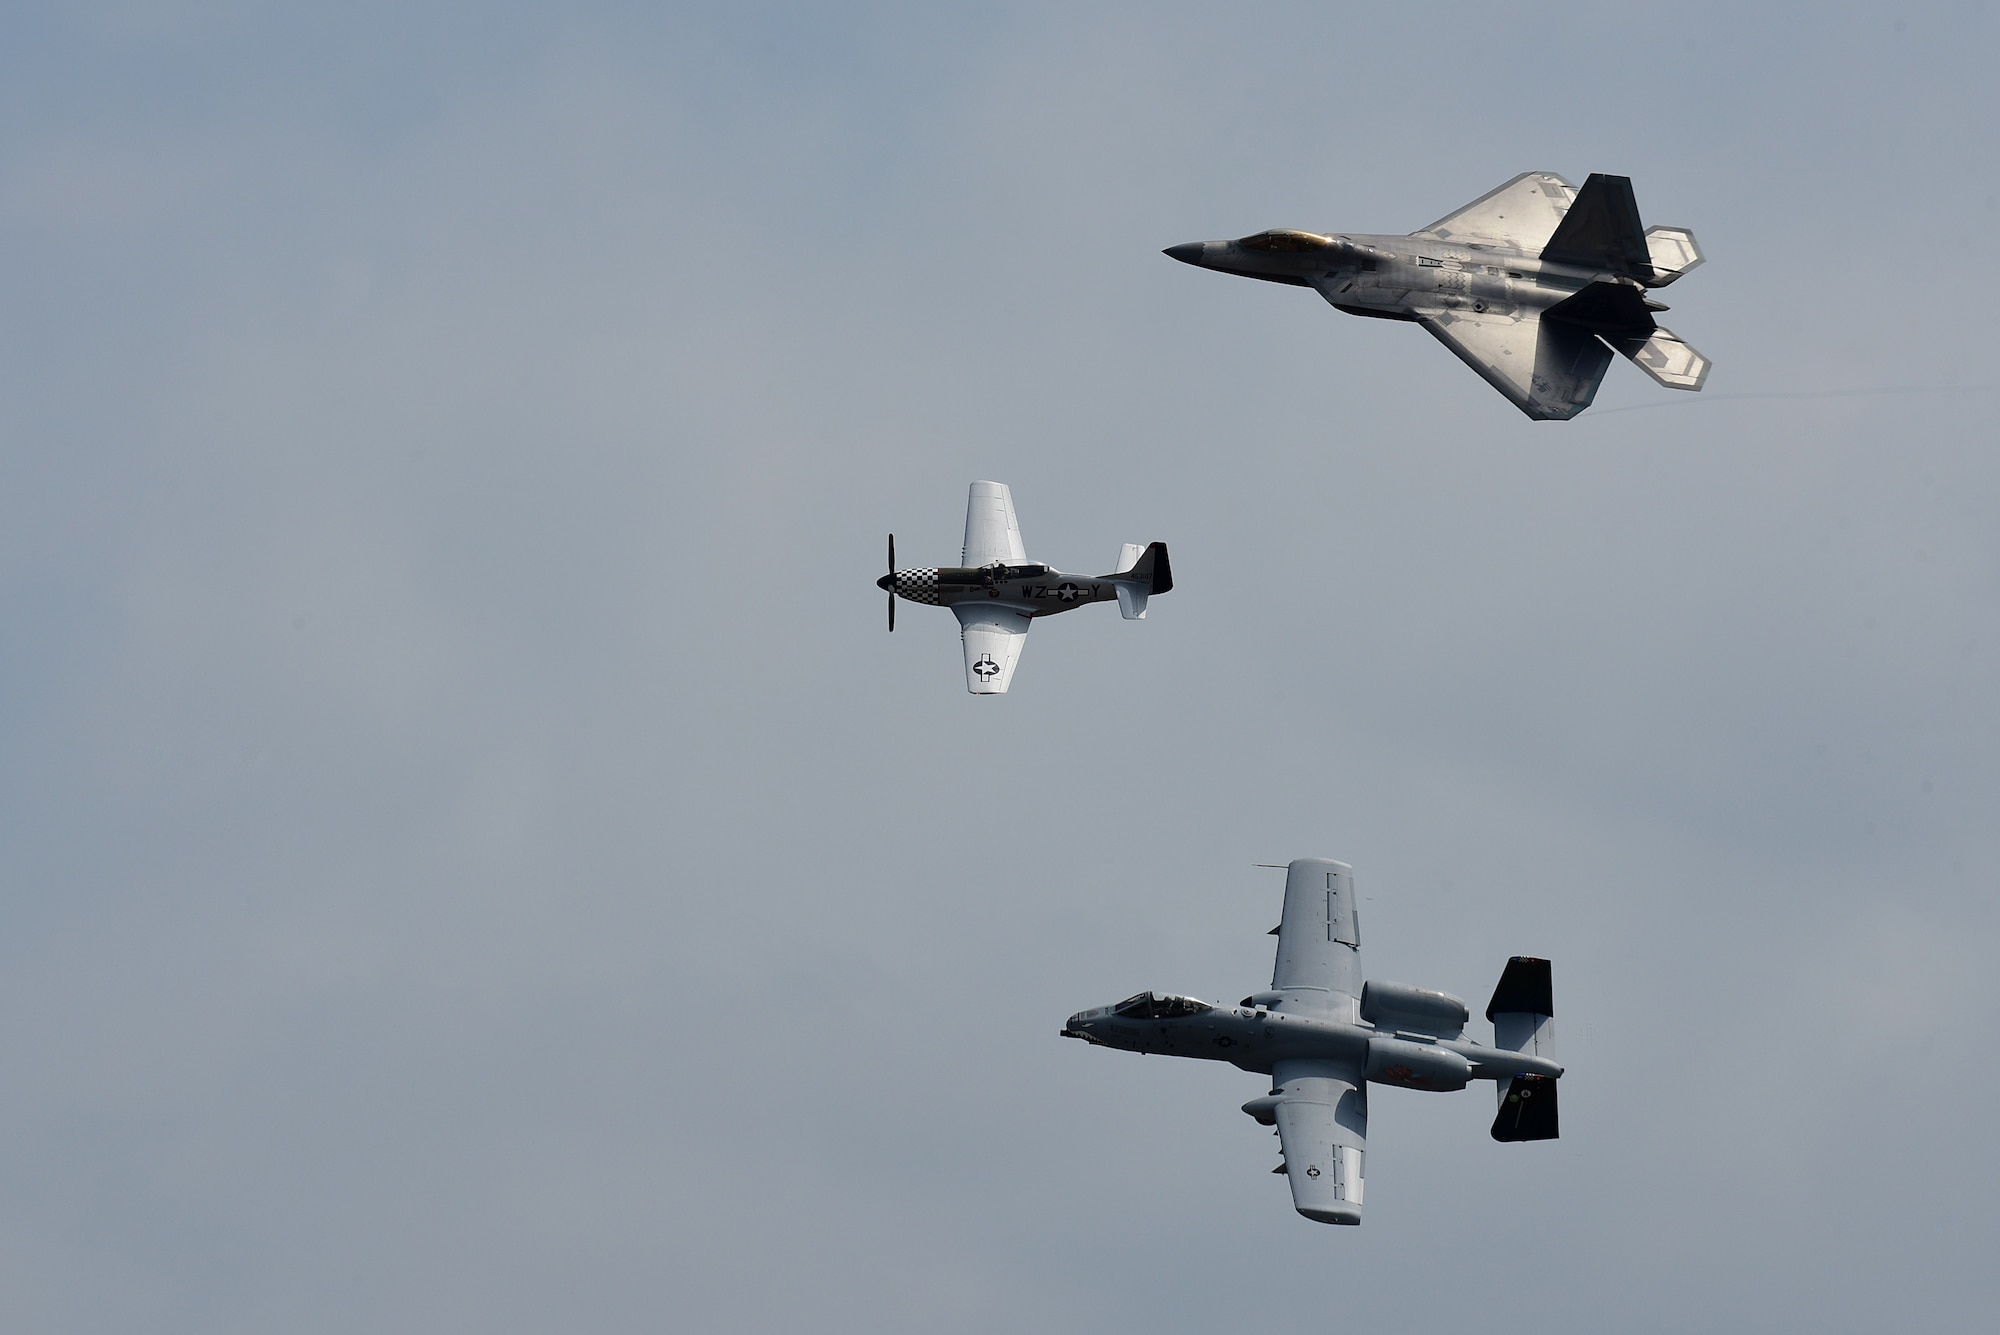 A P-51D Mustang, F-22 Raptor and A-10 Thunderbolt perform a tribute flight during the Wings Over Wayne Air Show, May 21, 2017, at Seymour Johnson Air Force Base, North Carolina. The formation consisted of aircraft dating back to World War II to current 5th-generation aircraft. (U.S. Air Force photo b Airman 1st Class Kenneth Boyton)